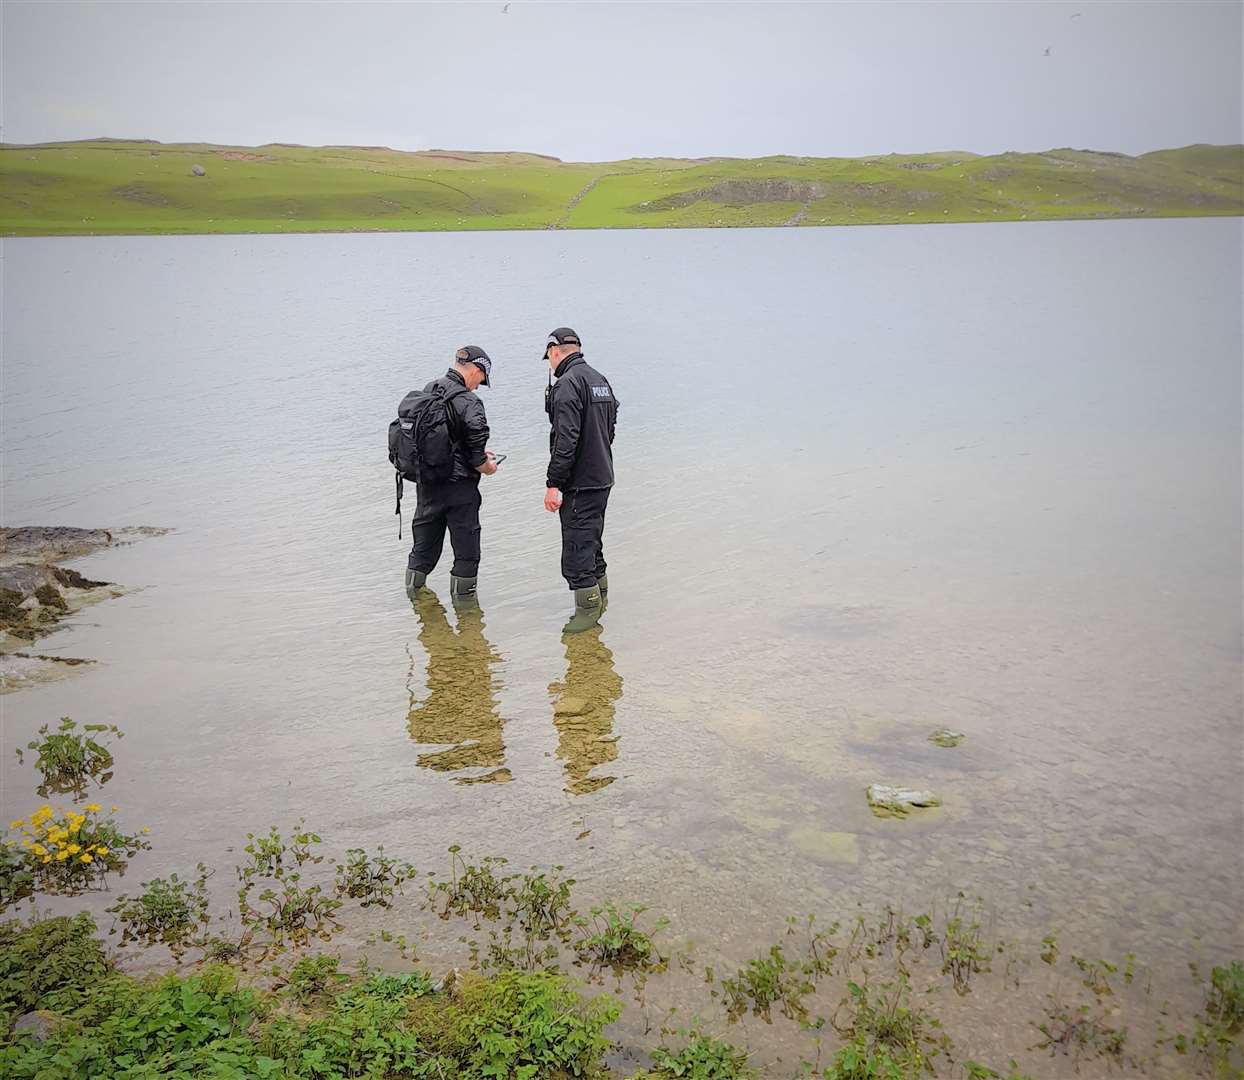 Officers removed the broken eggs from Loch Boralie near the Kyle of Durness.